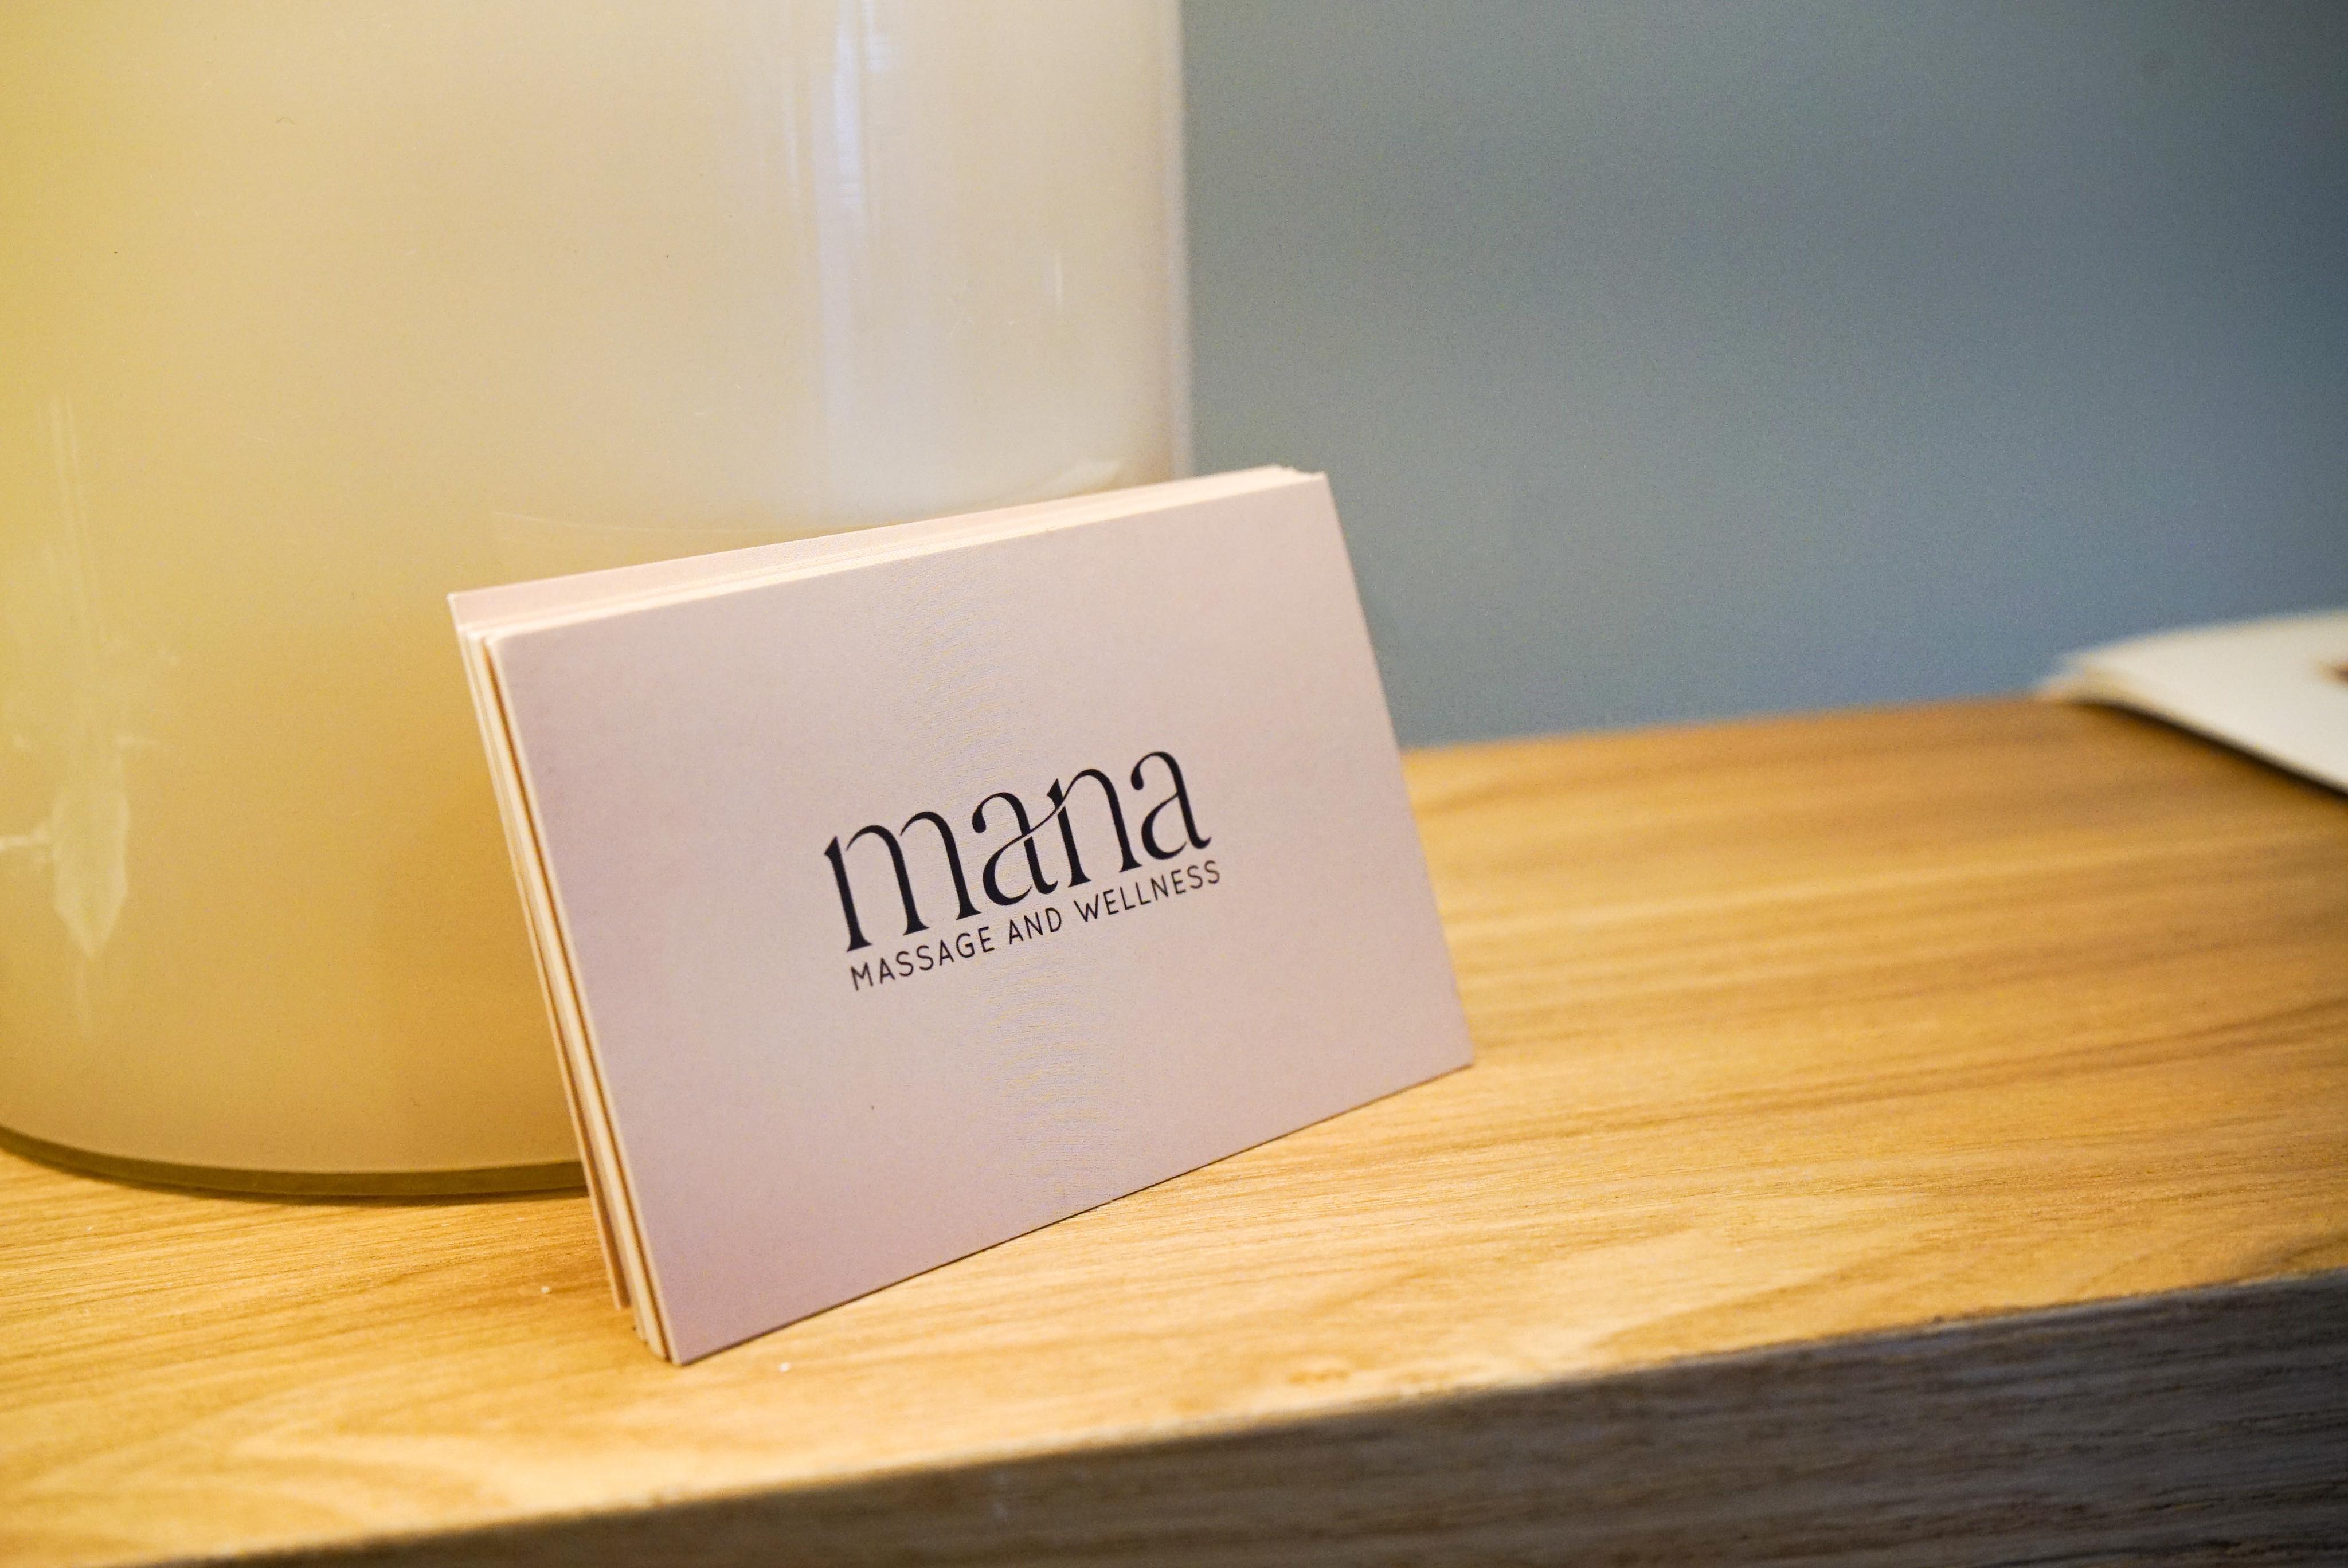 Mana Thai Massage And Wellness At Dee Why